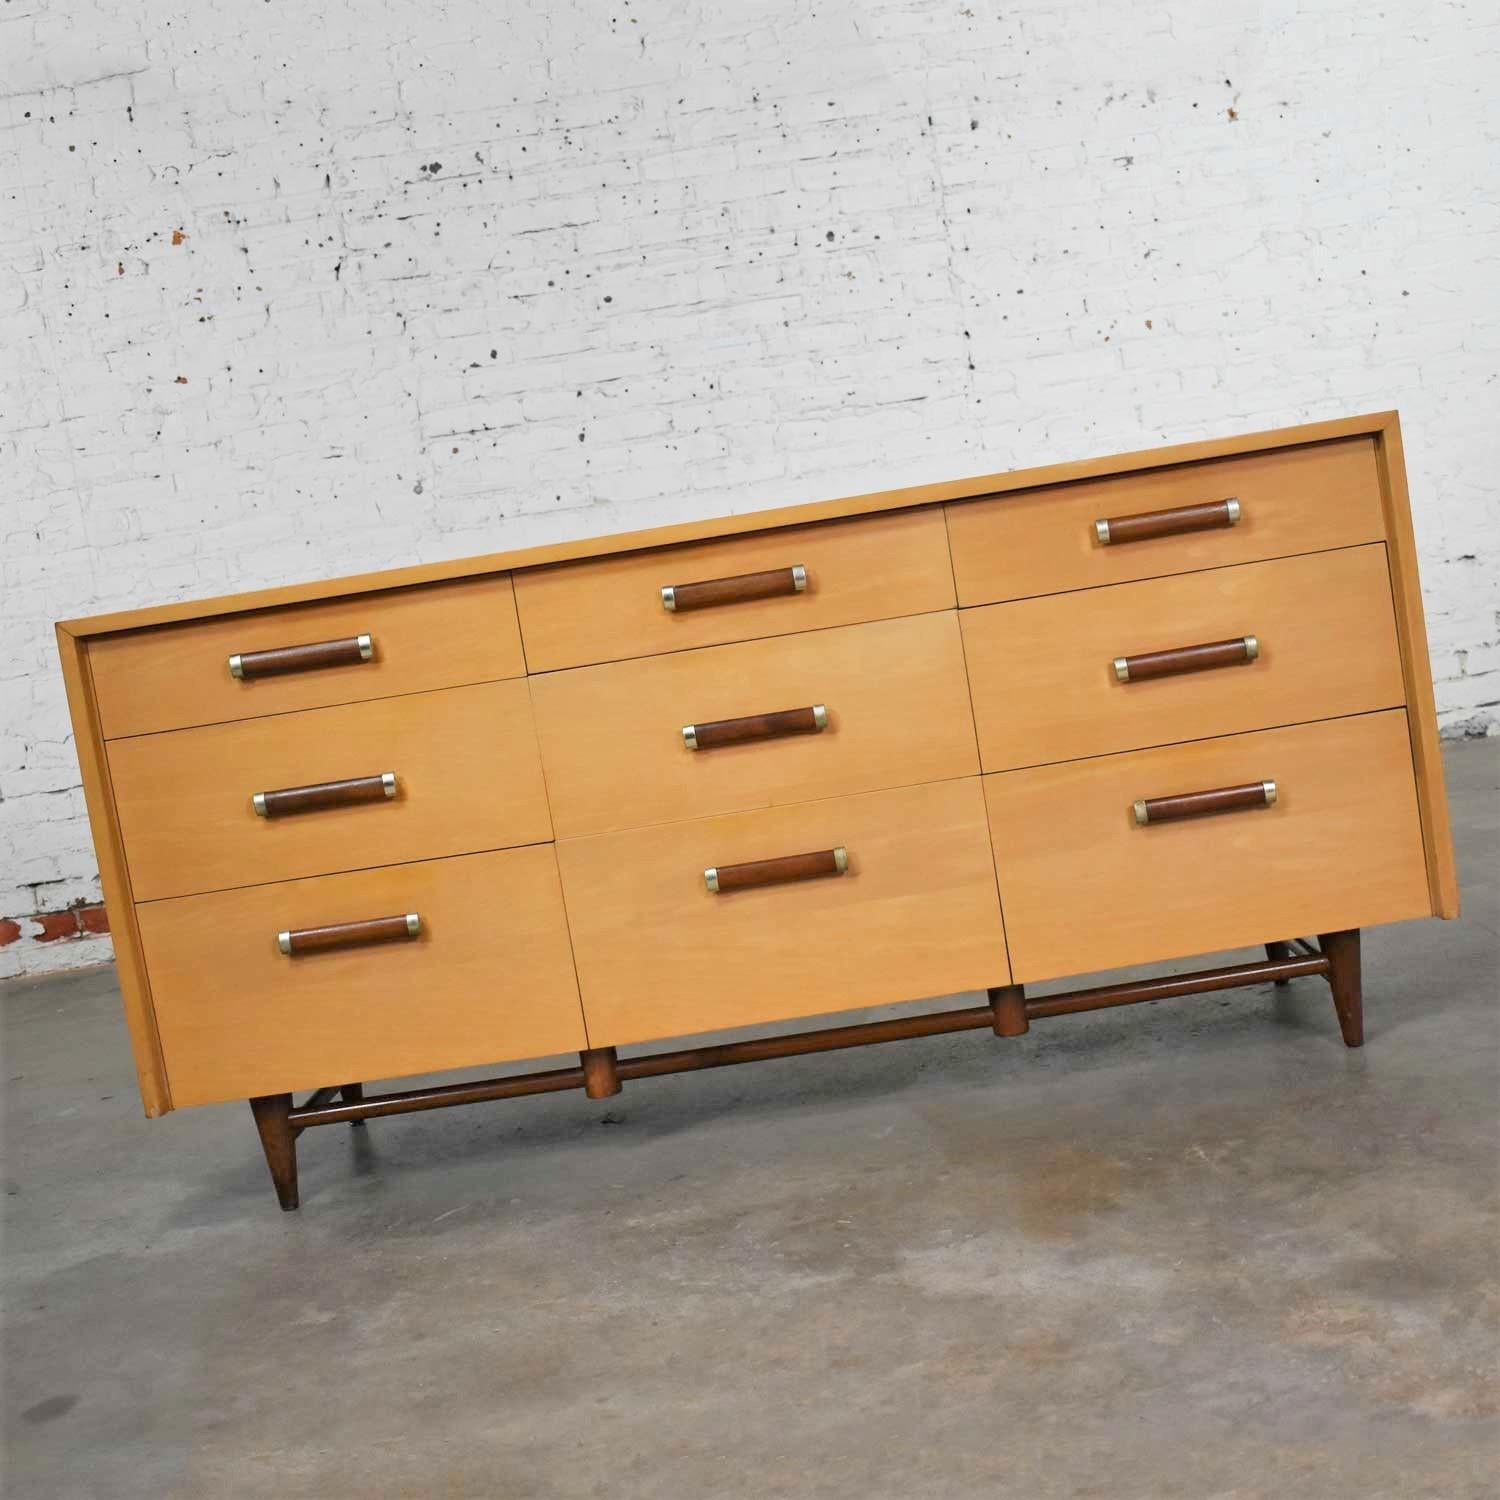 Handsome Mid-Century Modern nine-drawer dresser or credenza designed by Merton Gershun for his Urban Suburban line for American of Martinsville. It is in wonderful vintage condition. We have restored the cabinet top but there is still a nice age